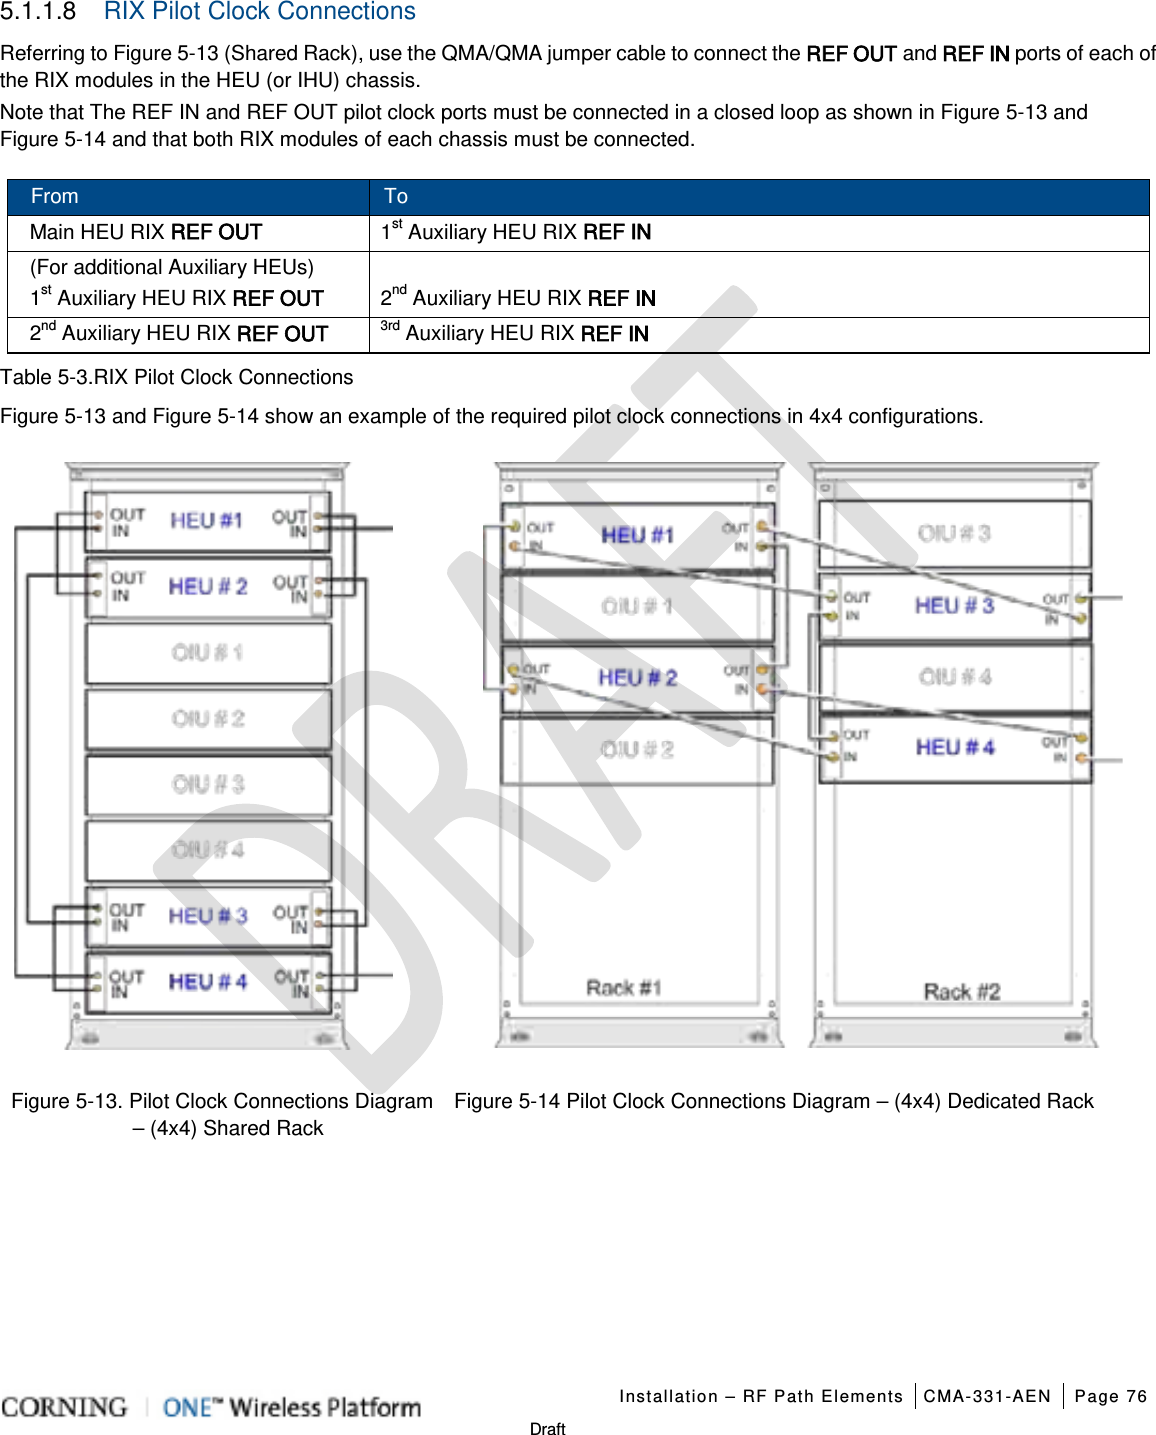   Installation – RF Path Elements CMA-331-AEN Page 76   Draft 5.1.1.8  RIX Pilot Clock Connections Referring to Figure  5-13 (Shared Rack), use the QMA/QMA jumper cable to connect the REF OUT and REF IN ports of each of the RIX modules in the HEU (or IHU) chassis. Note that The REF IN and REF OUT pilot clock ports must be connected in a closed loop as shown in Figure  5-13 and Figure  5-14 and that both RIX modules of each chassis must be connected. From To Main HEU RIX REF OUT  1st Auxiliary HEU RIX REF IN (For additional Auxiliary HEUs) 1st Auxiliary HEU RIX REF OUT  2nd Auxiliary HEU RIX REF IN 2nd Auxiliary HEU RIX REF OUT 3rd Auxiliary HEU RIX REF IN Table  5-3.RIX Pilot Clock Connections Figure  5-13 and Figure  5-14 show an example of the required pilot clock connections in 4x4 configurations.   Figure  5-13. Pilot Clock Connections Diagram – (4x4) Shared Rack Figure  5-14 Pilot Clock Connections Diagram – (4x4) Dedicated Rack    